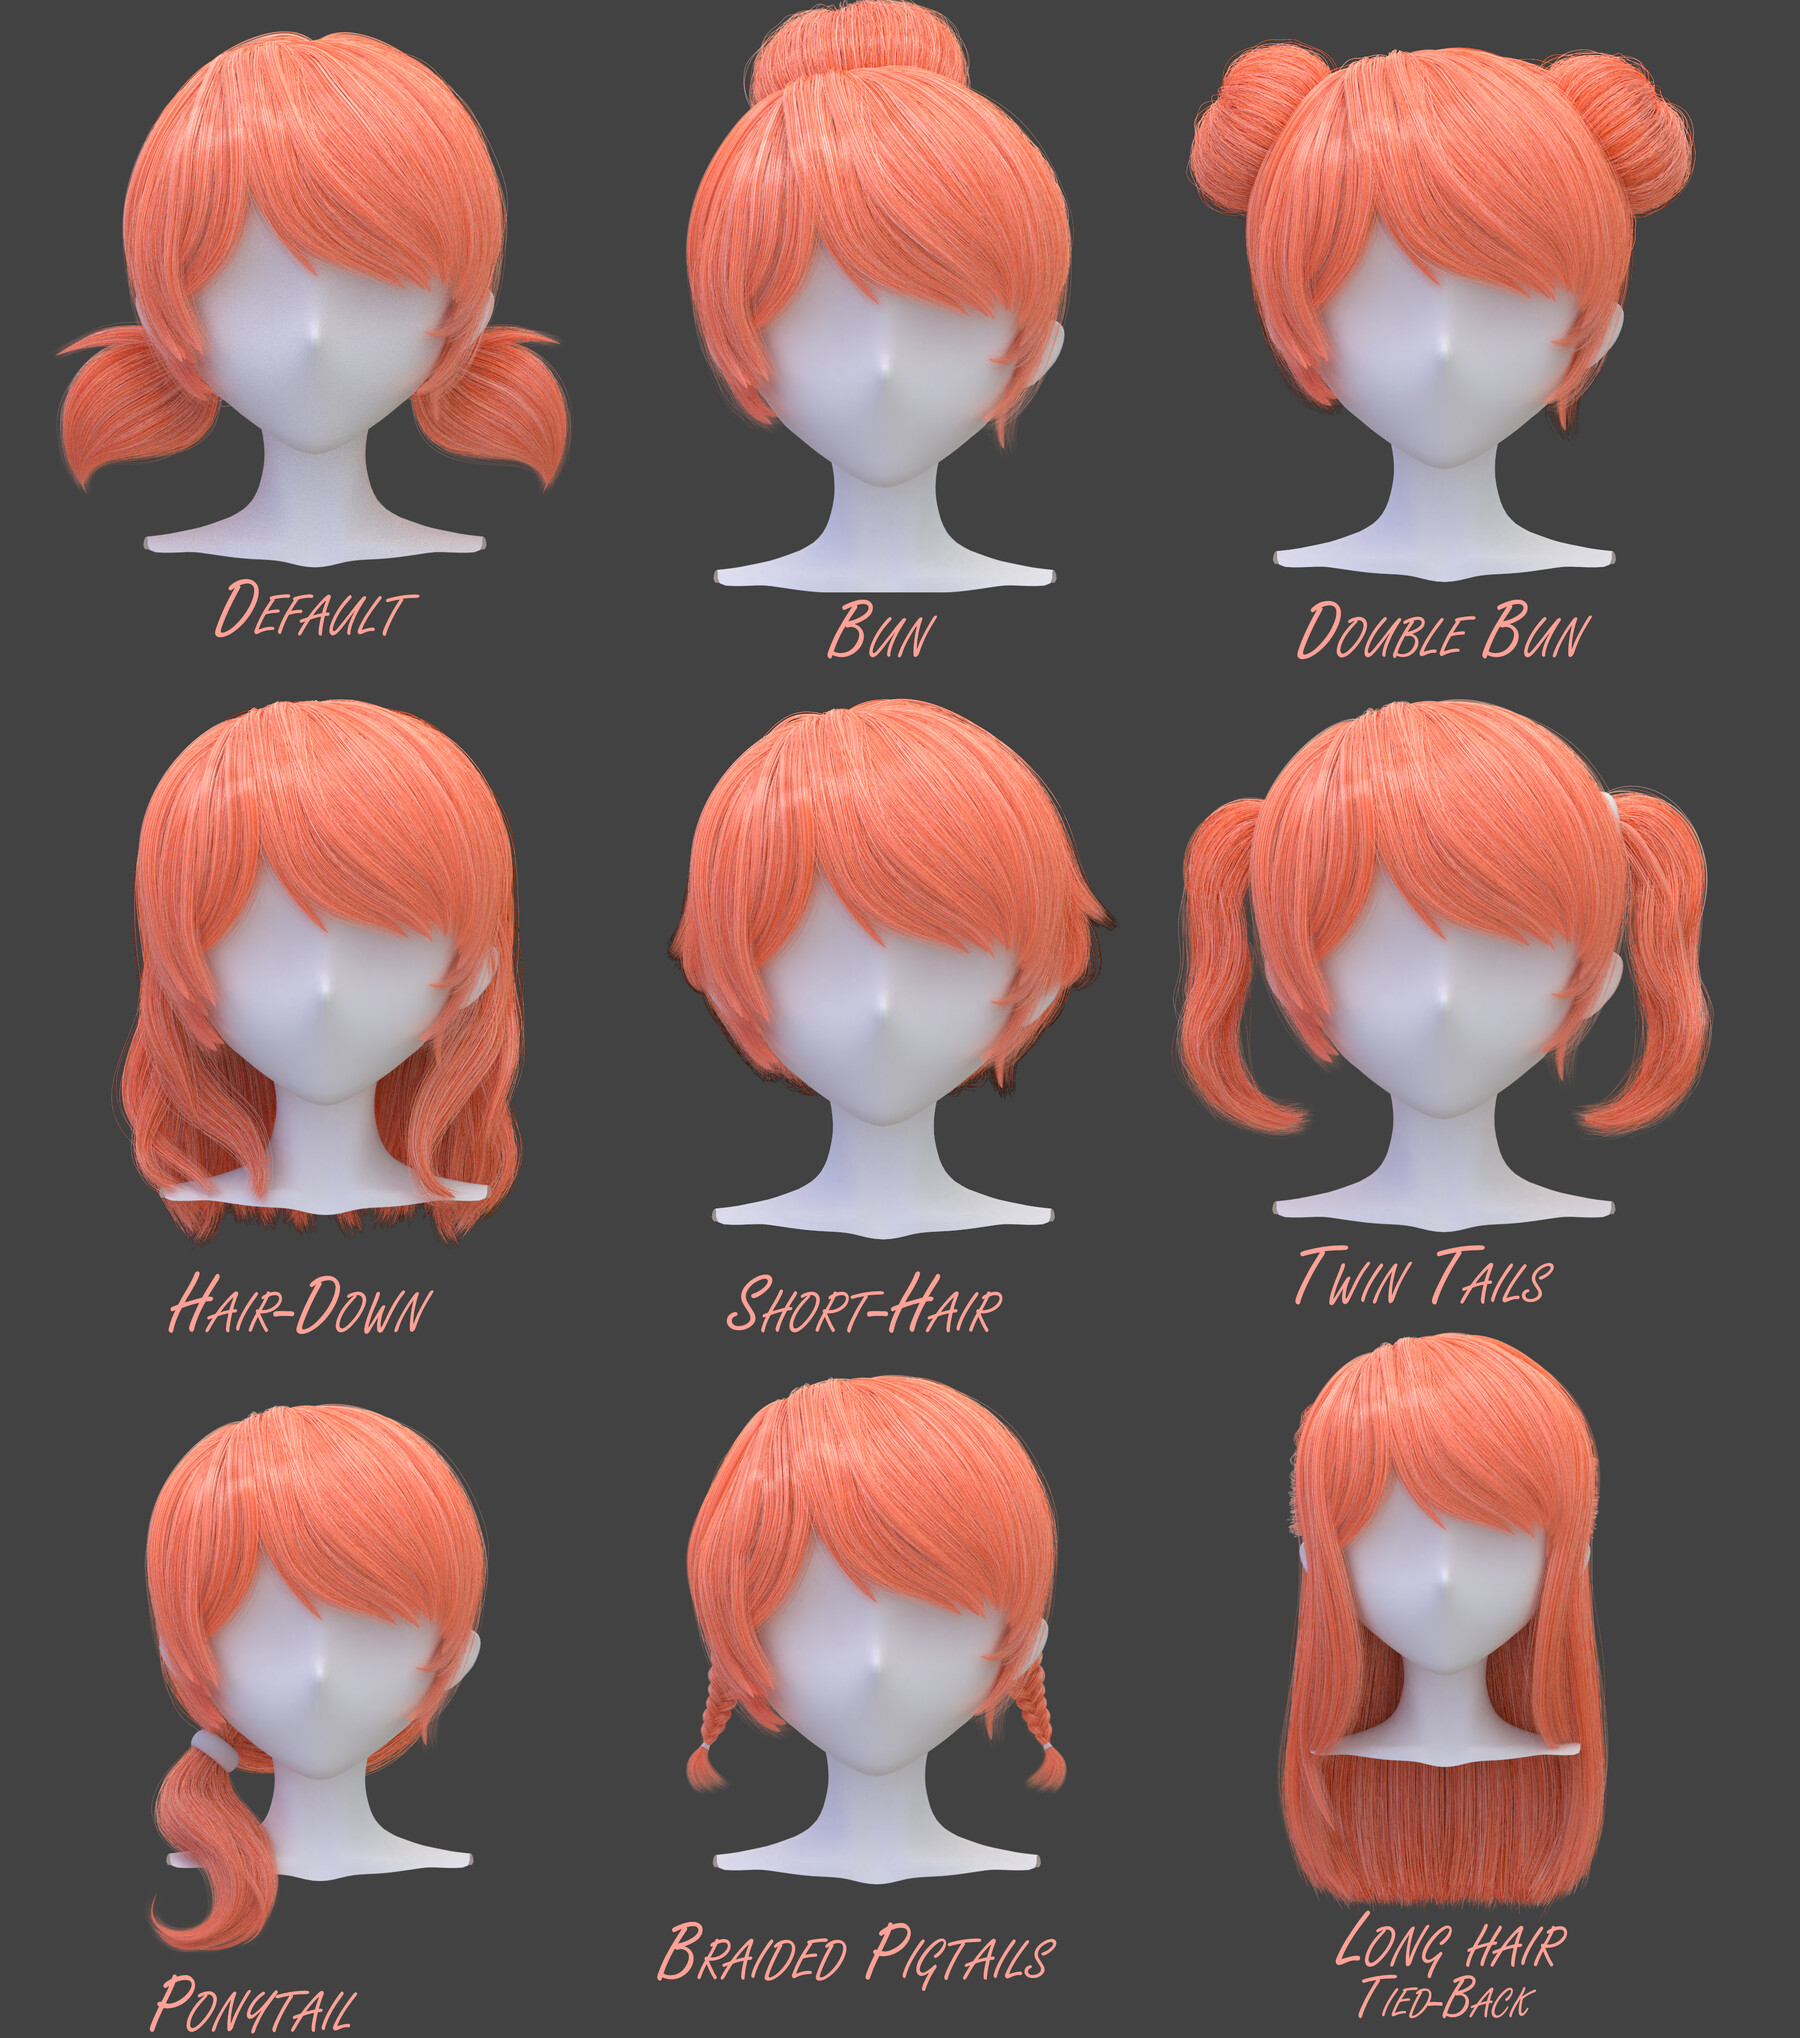 hairstyles  Anime hairstyles in real life, Anime haircut, Anime hair